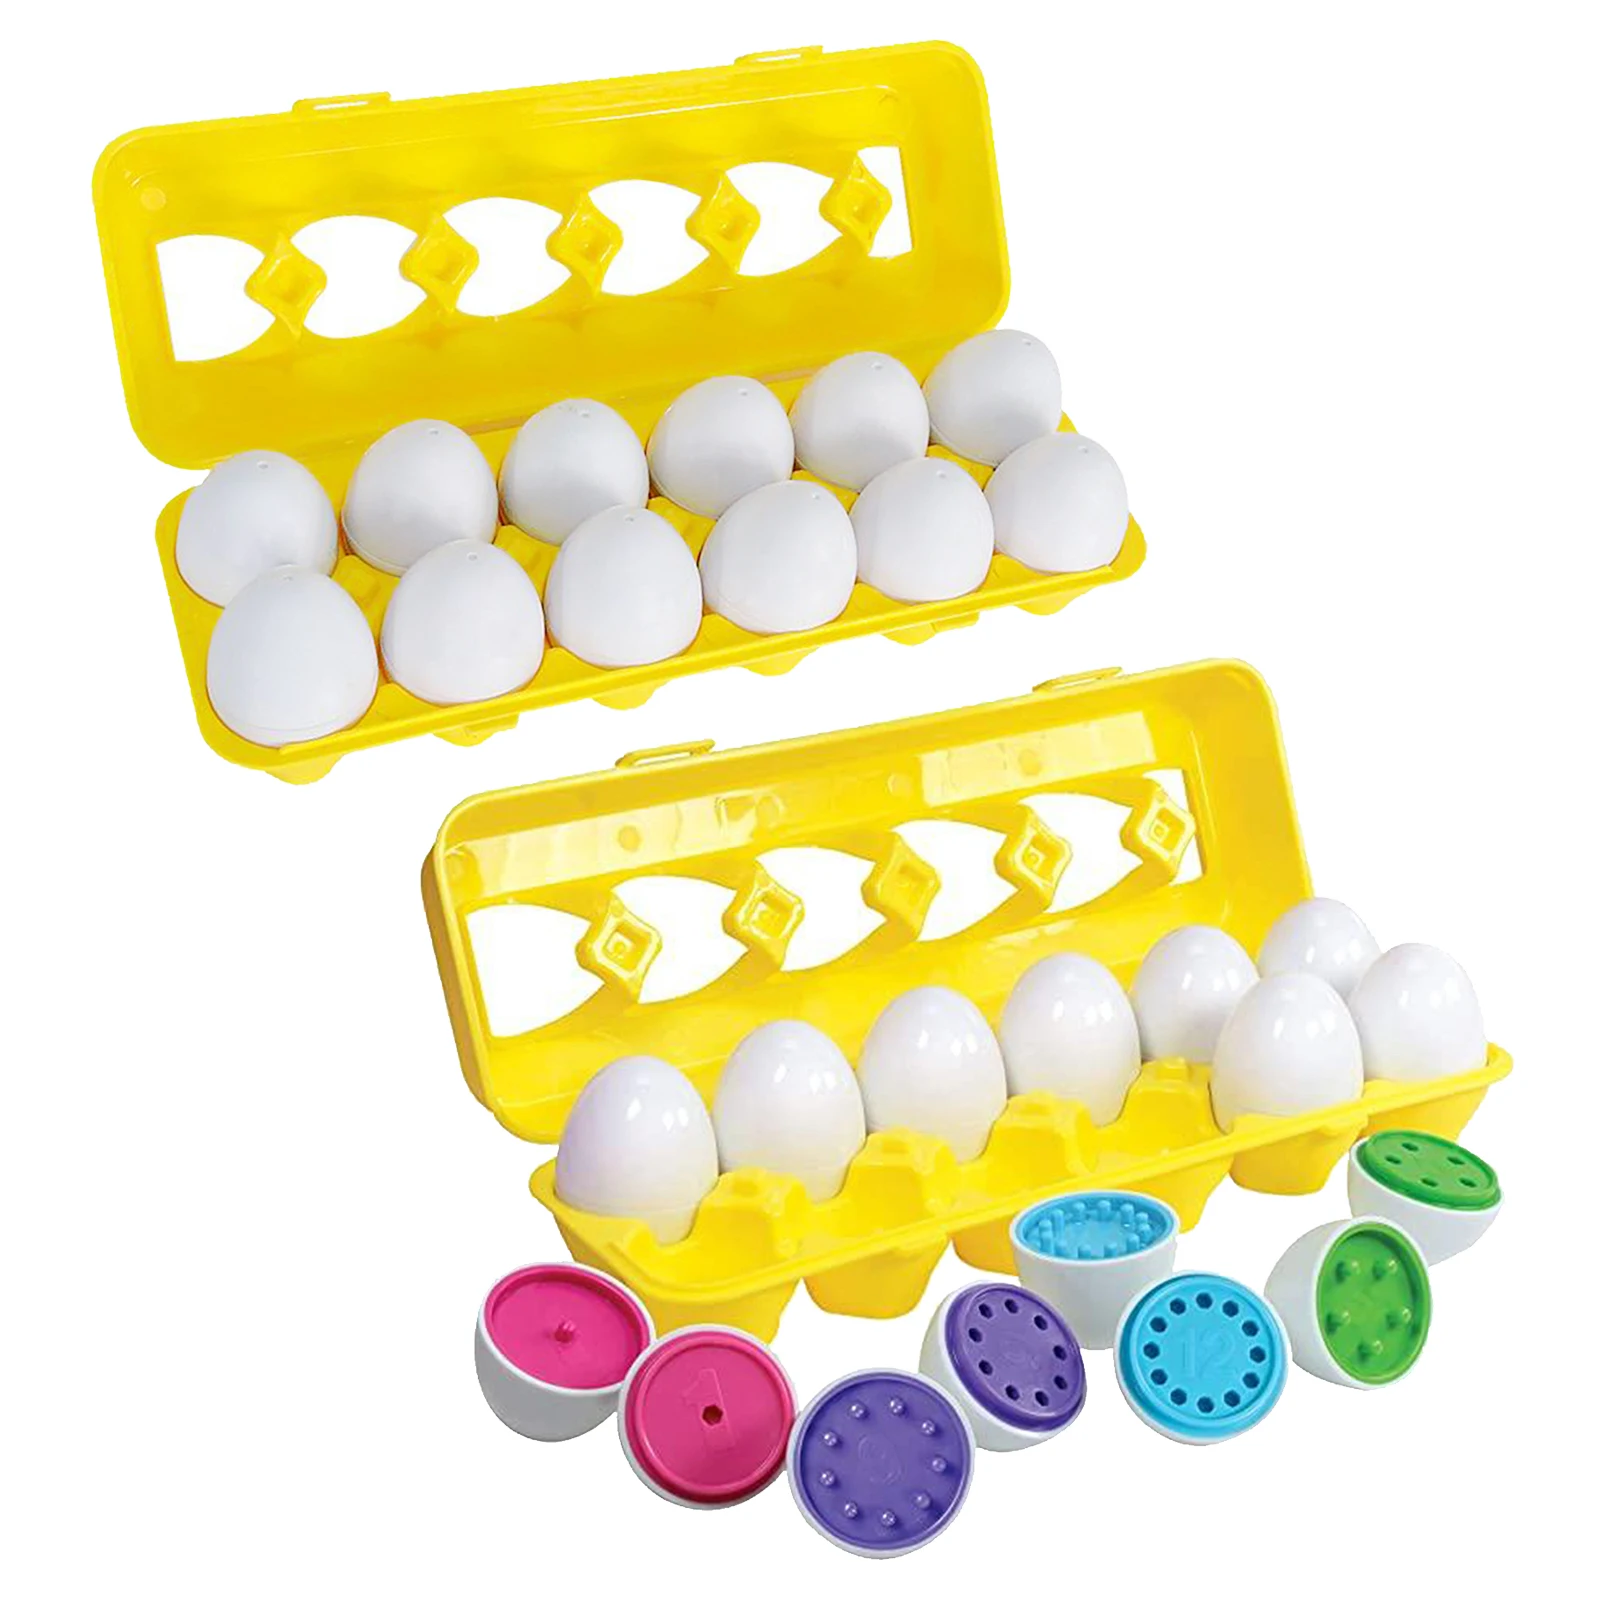 Matching Eggs 12 pcs Color & Shape Recoginition Sorter Puzzle for Easter Travel